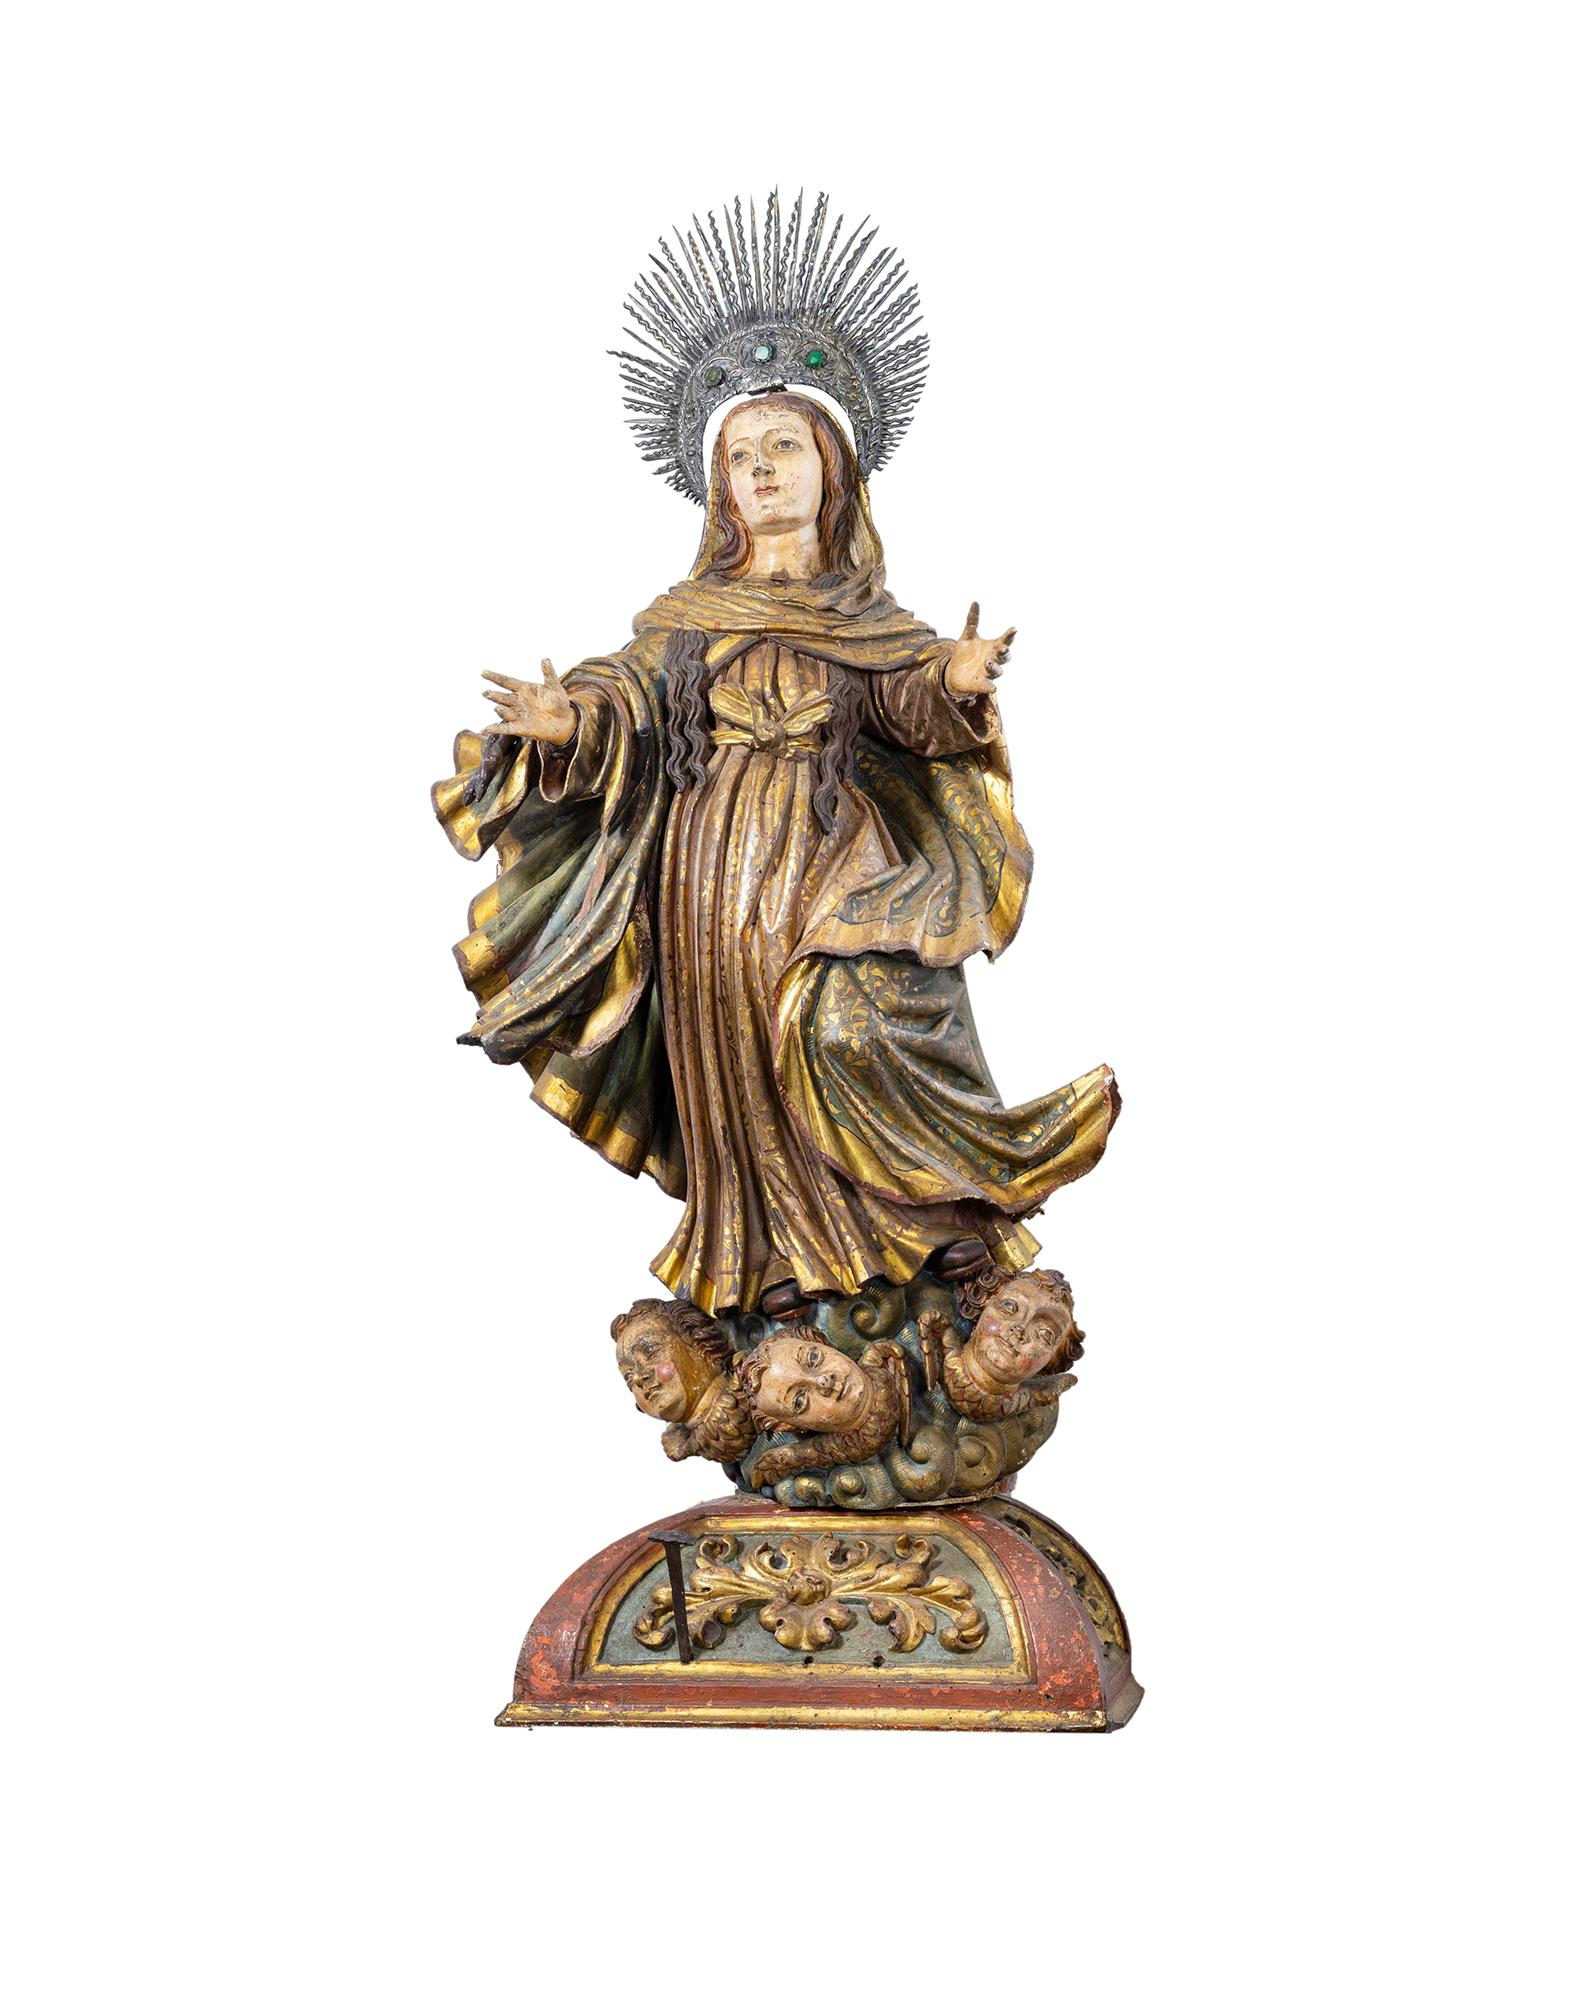 A rare and unique baroque Spanish sculpture of the Immaculate Conception in polychromed chestnut carving wood and a silver crown, with a original wooden podium, representing a 18th century scene of the iconography of the Immaculate Virgin to praise